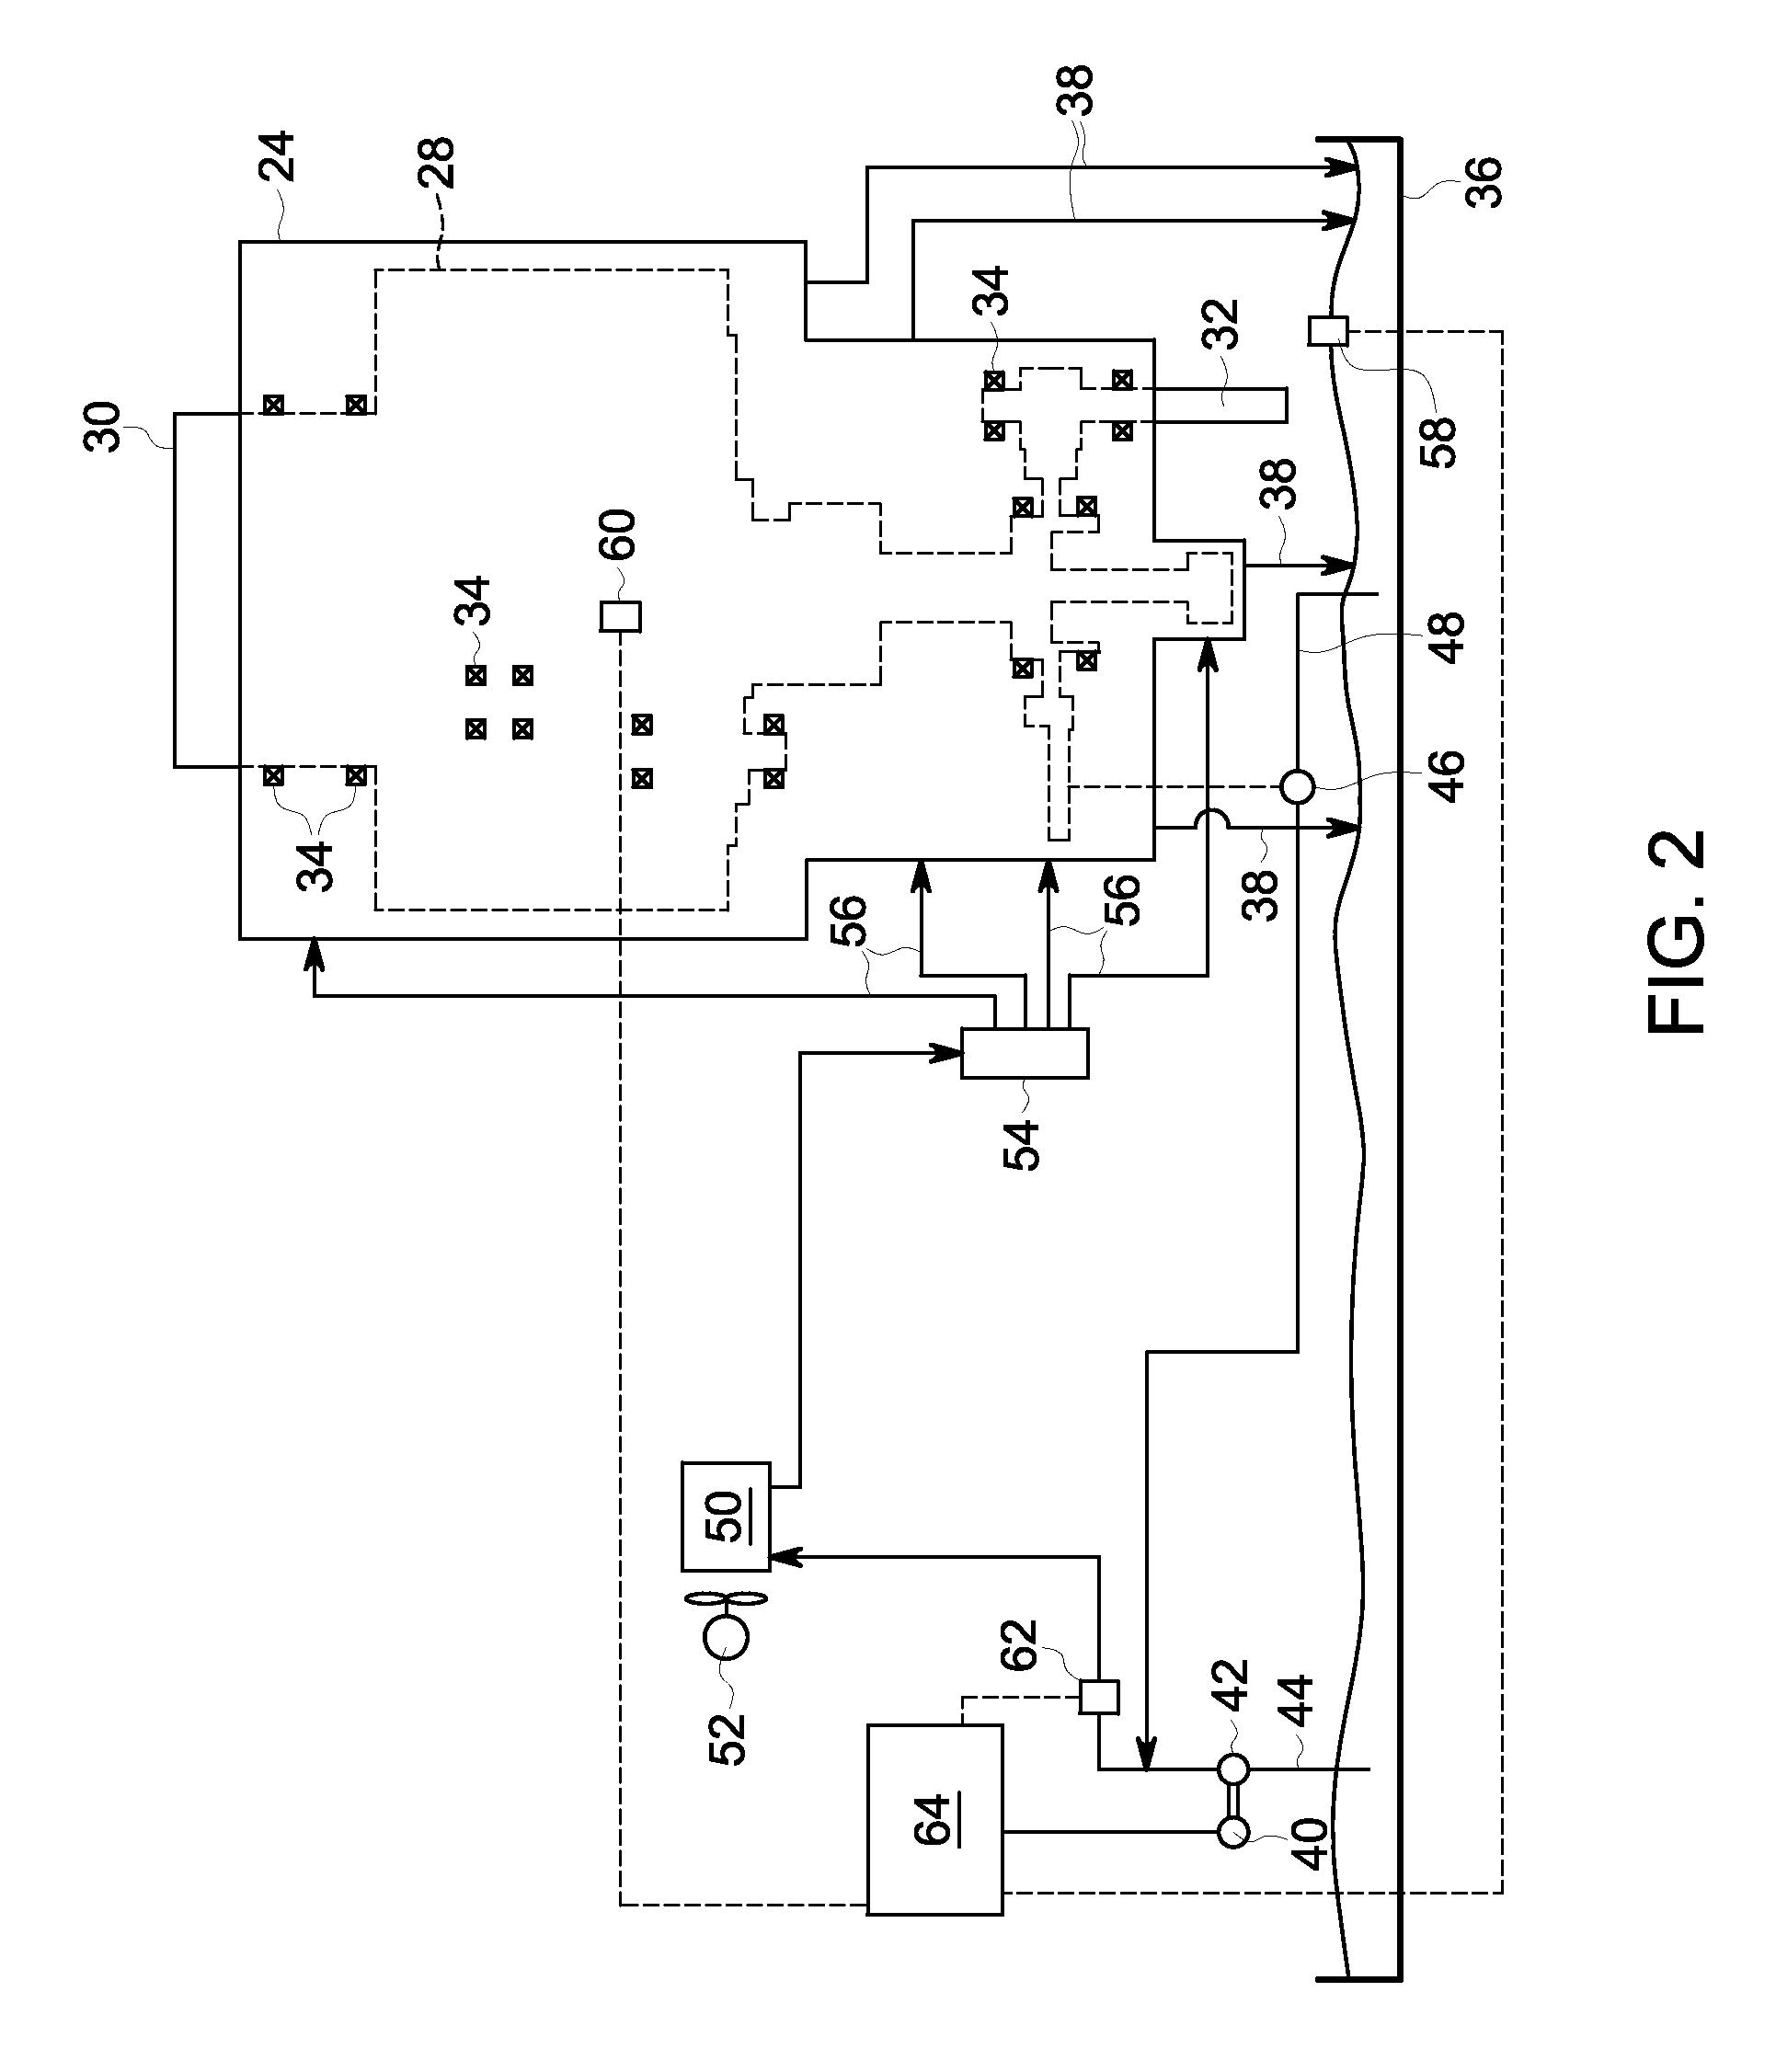 Lubricant supply system and method for controlling gearbox lubrication